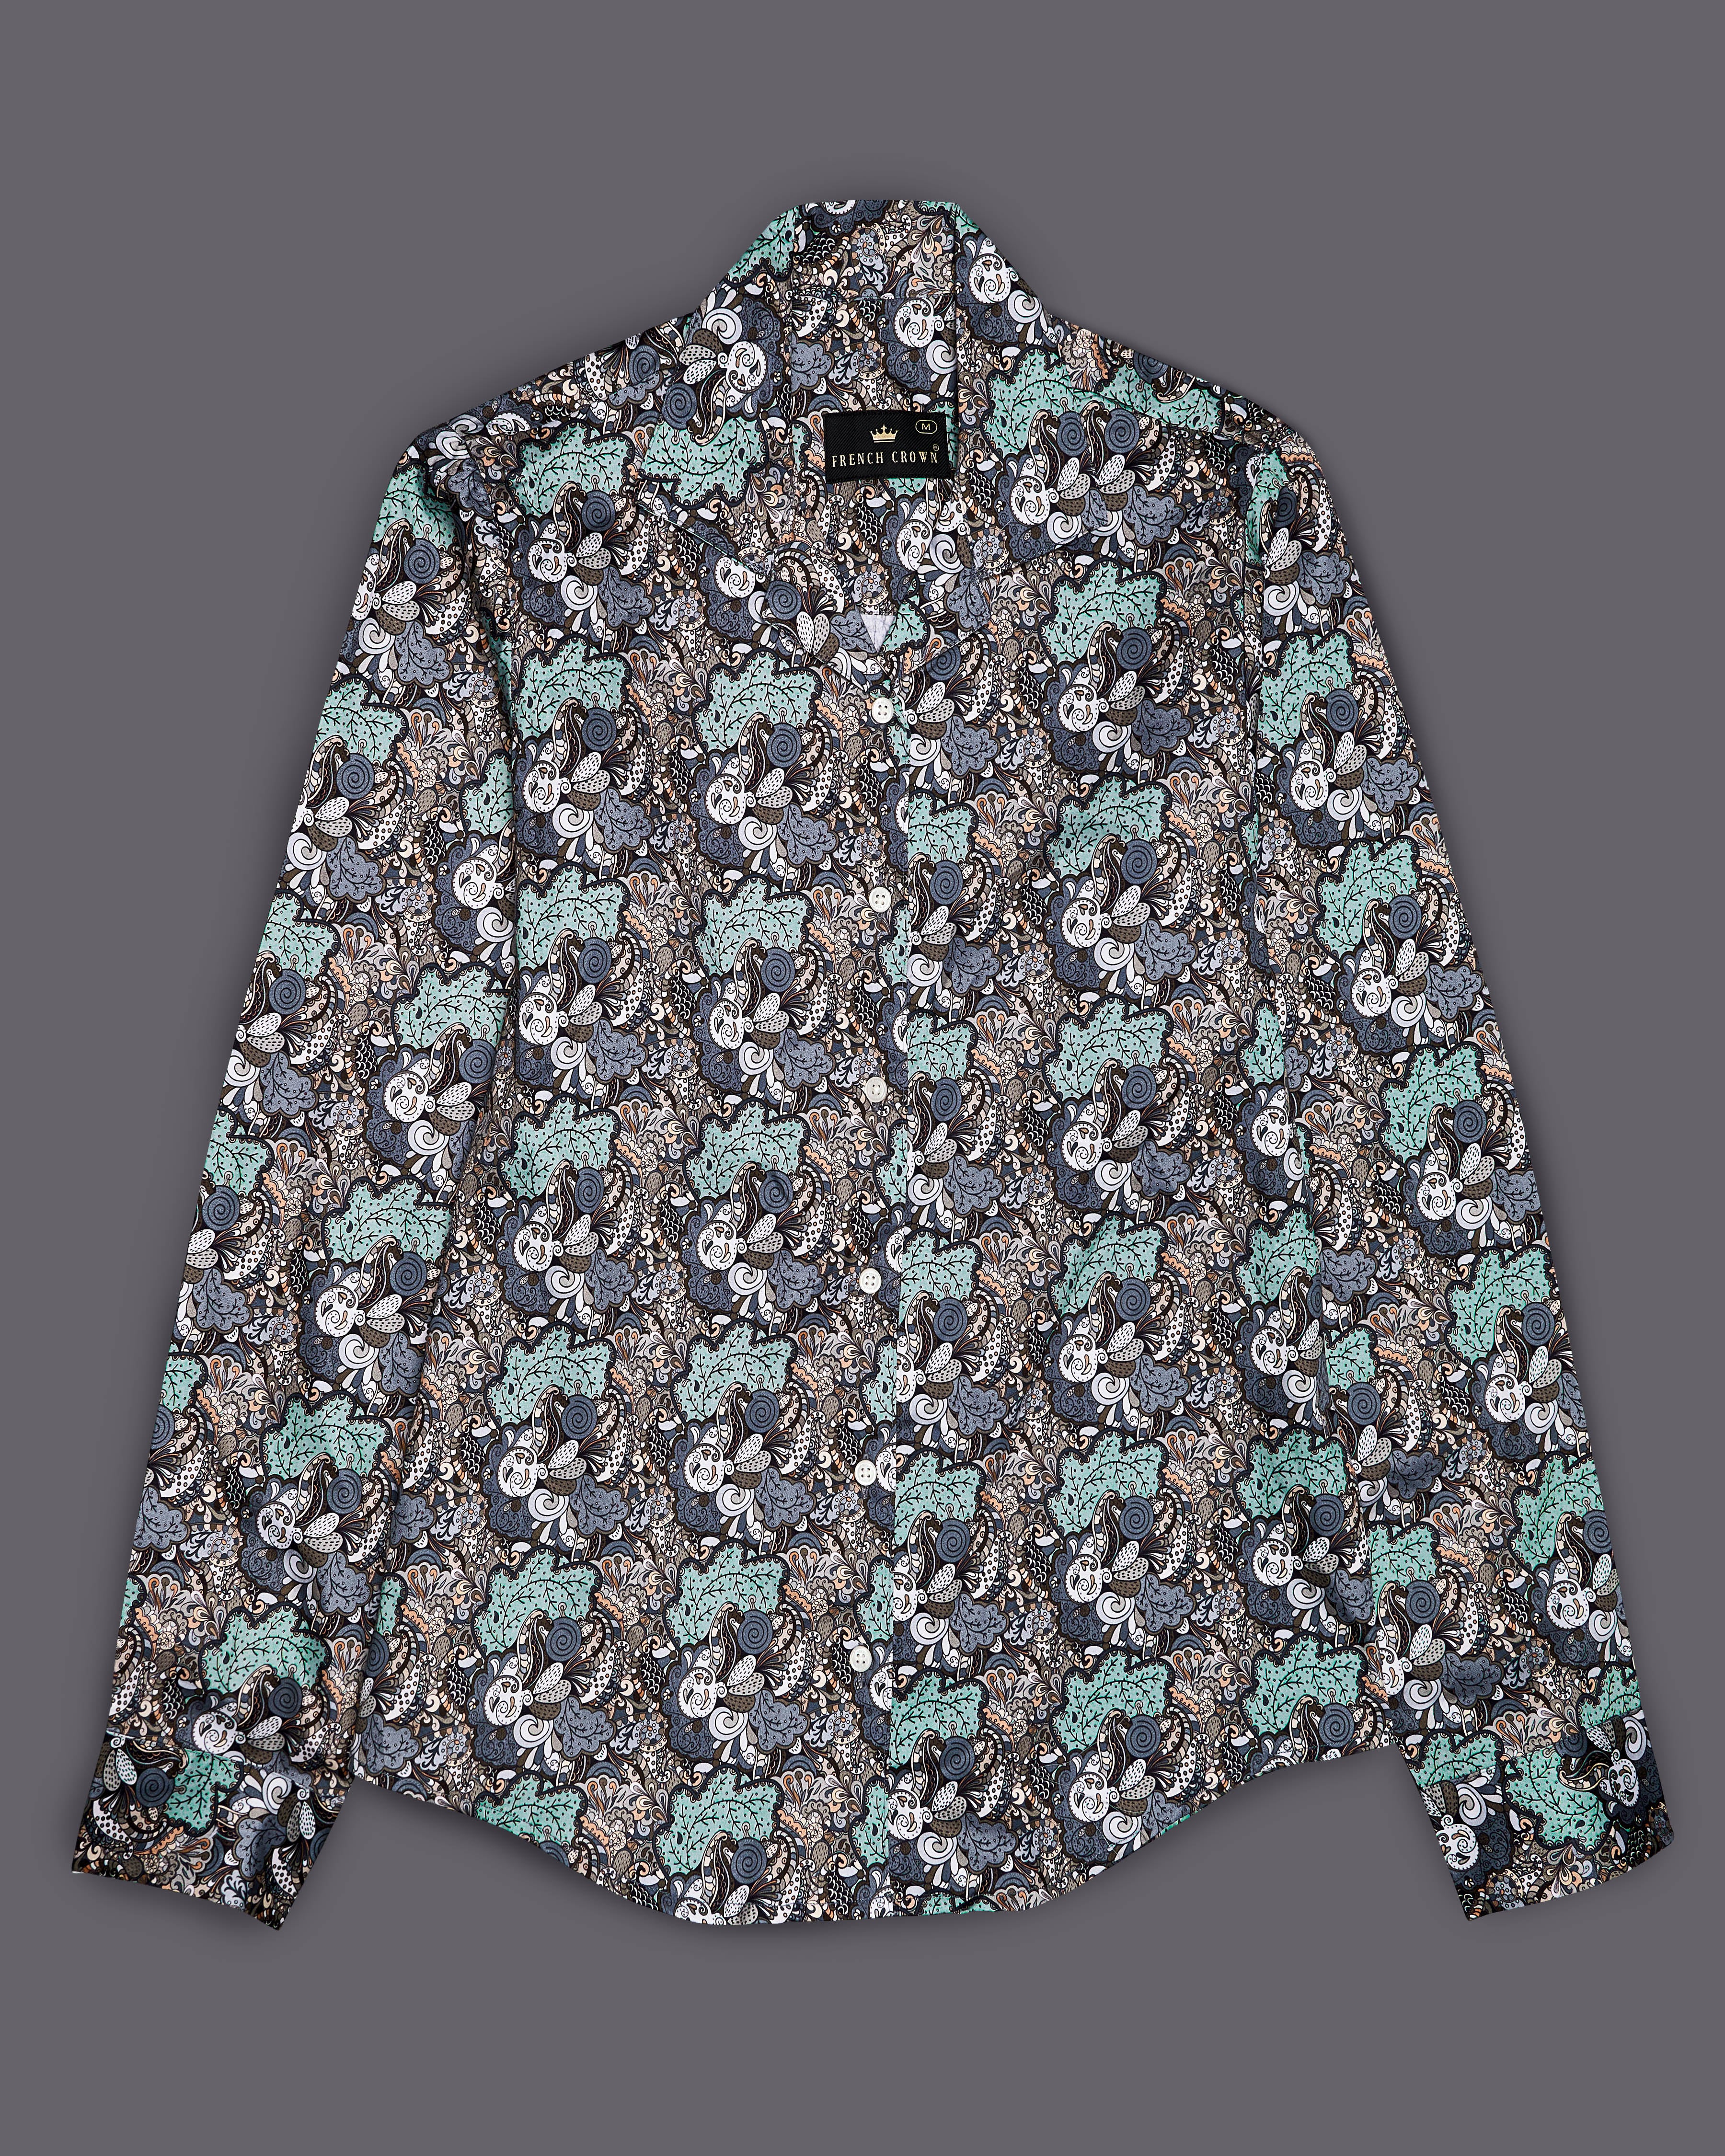 Pewter Green with Storm Gray Quirky Printed Premium Cotton Shirt WS031-CC-32, WS031-CC-34, WS031-CC-36, WS031-CC-38, WS031-CC-40, WS031-CC-42